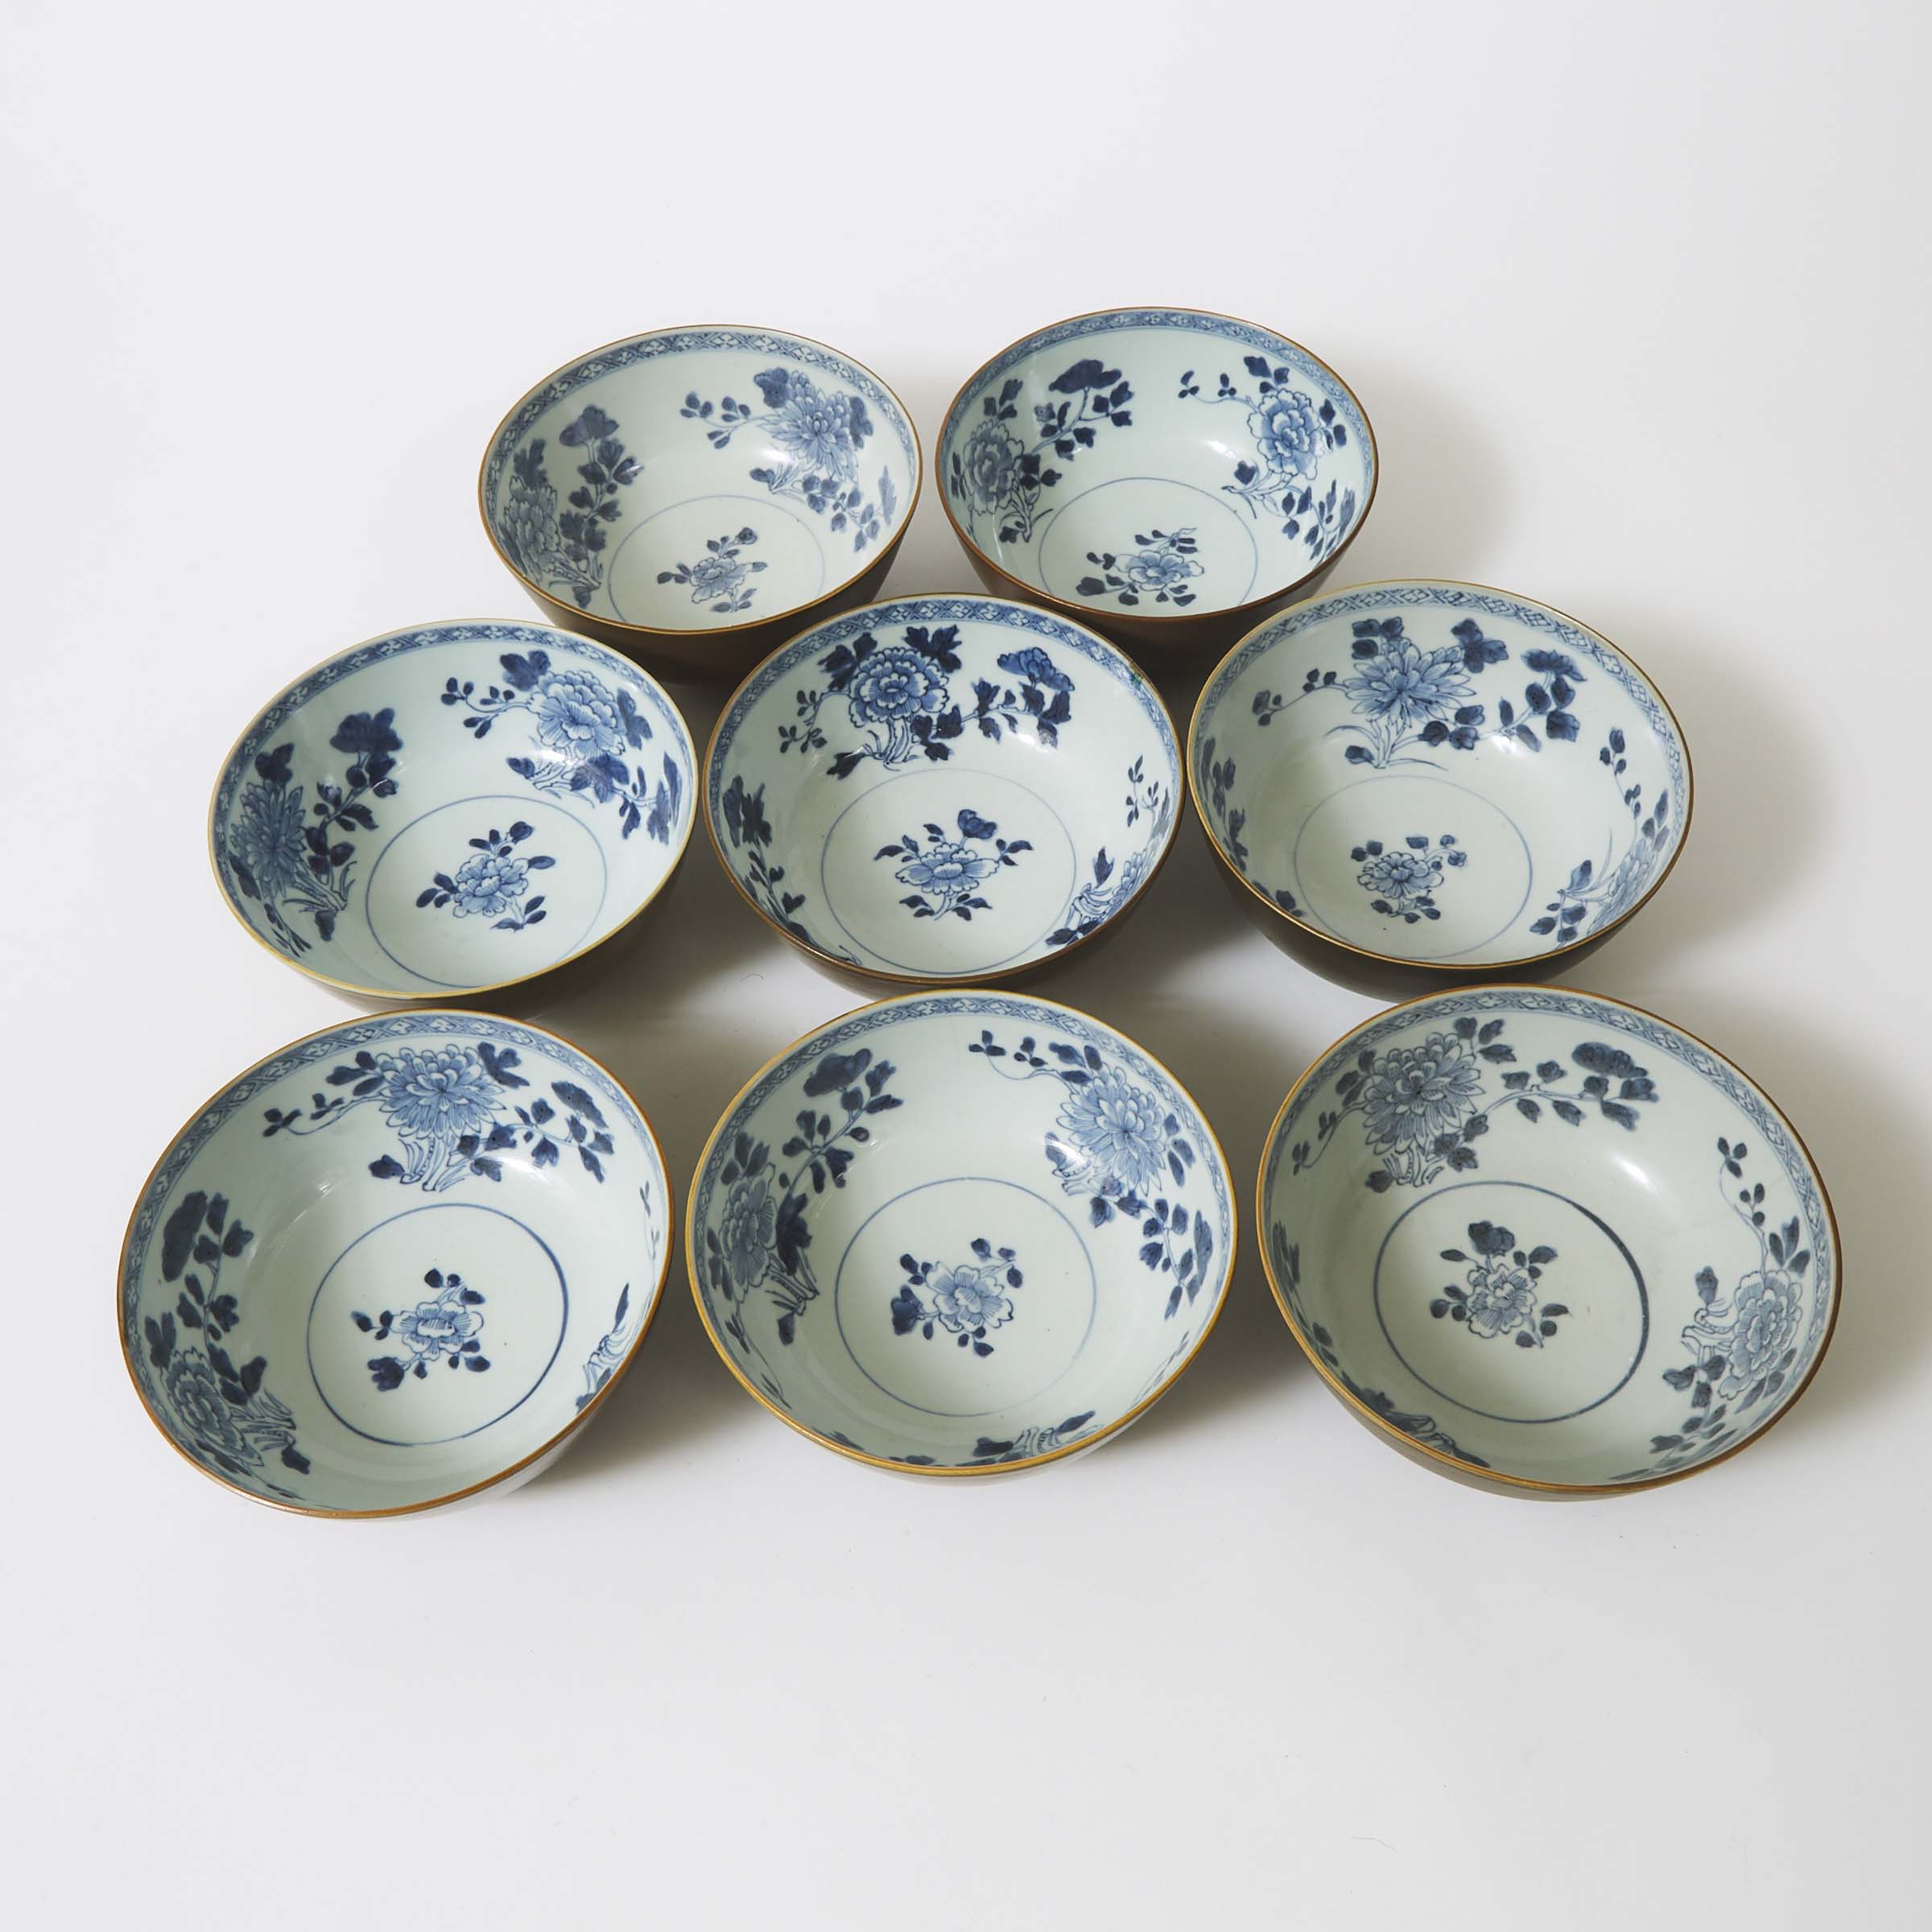 A Set of Eight 'Batavian' Floral Large Bowls from the Nanking Cargo, Qianlong Period, Circa 1750